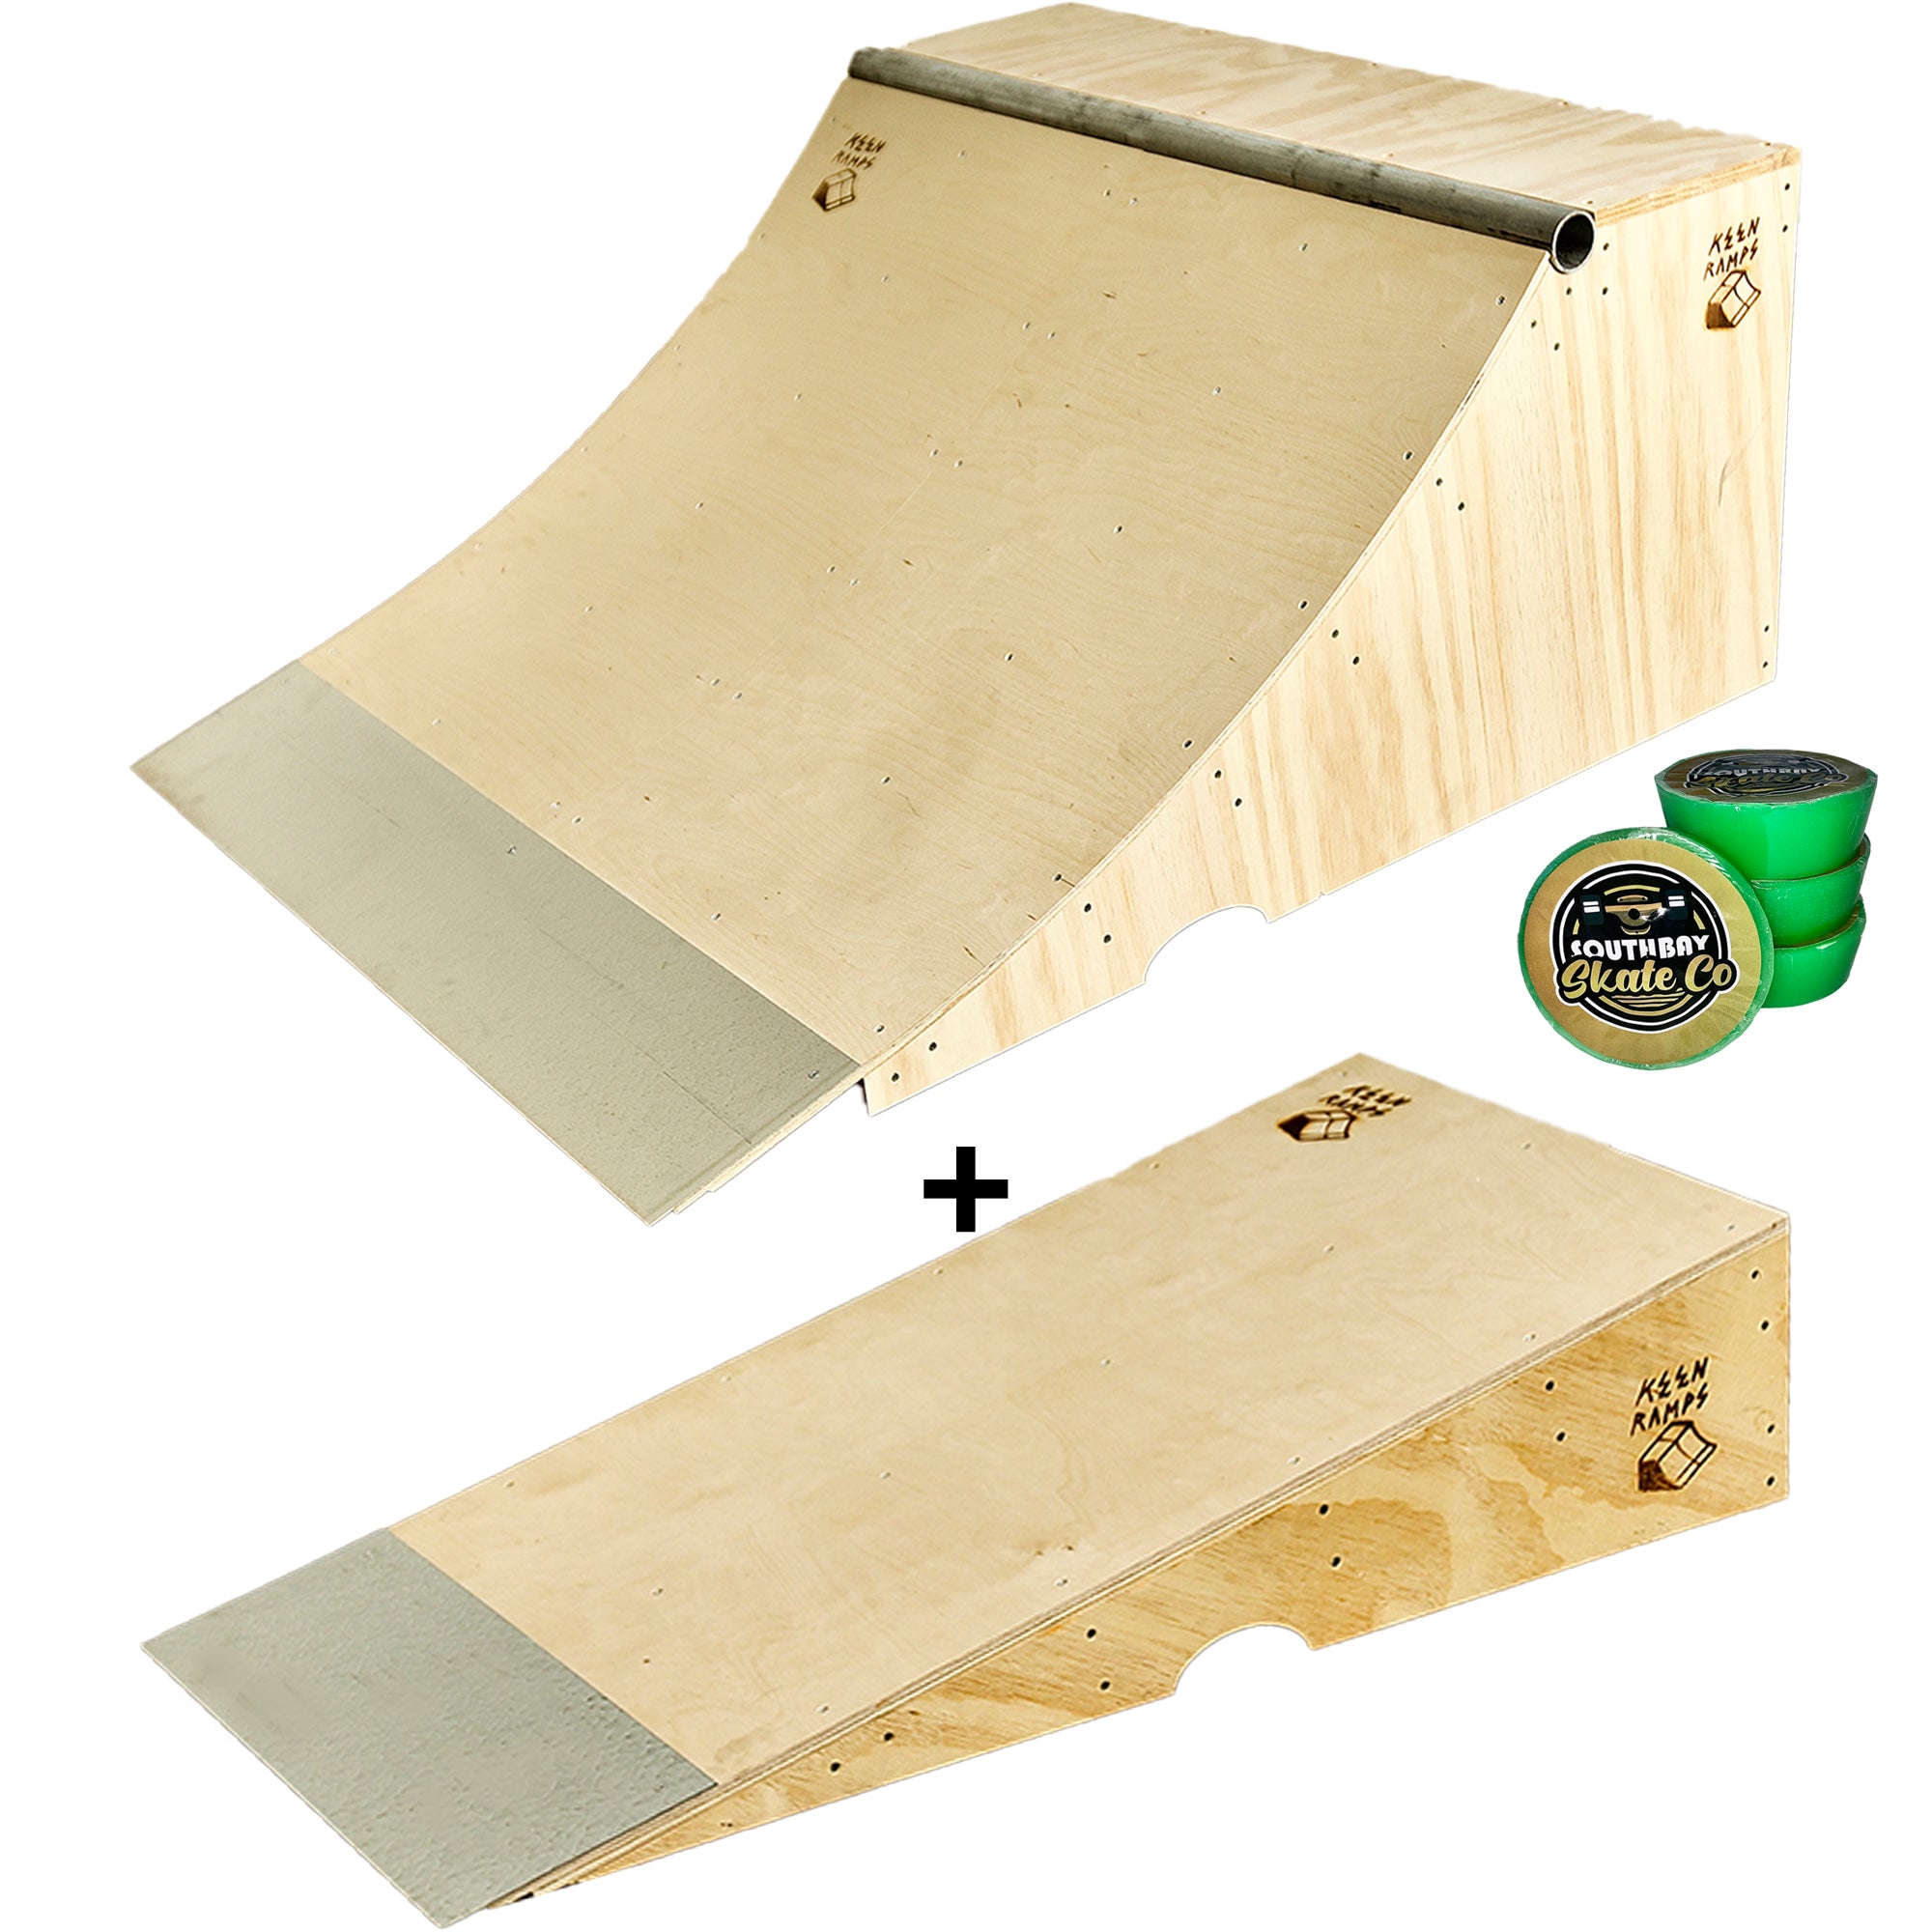 South Bay Skate Co Quarter Pipe Skateboard Ramp 2 Tall X 4 Wide By Keen Ramps South